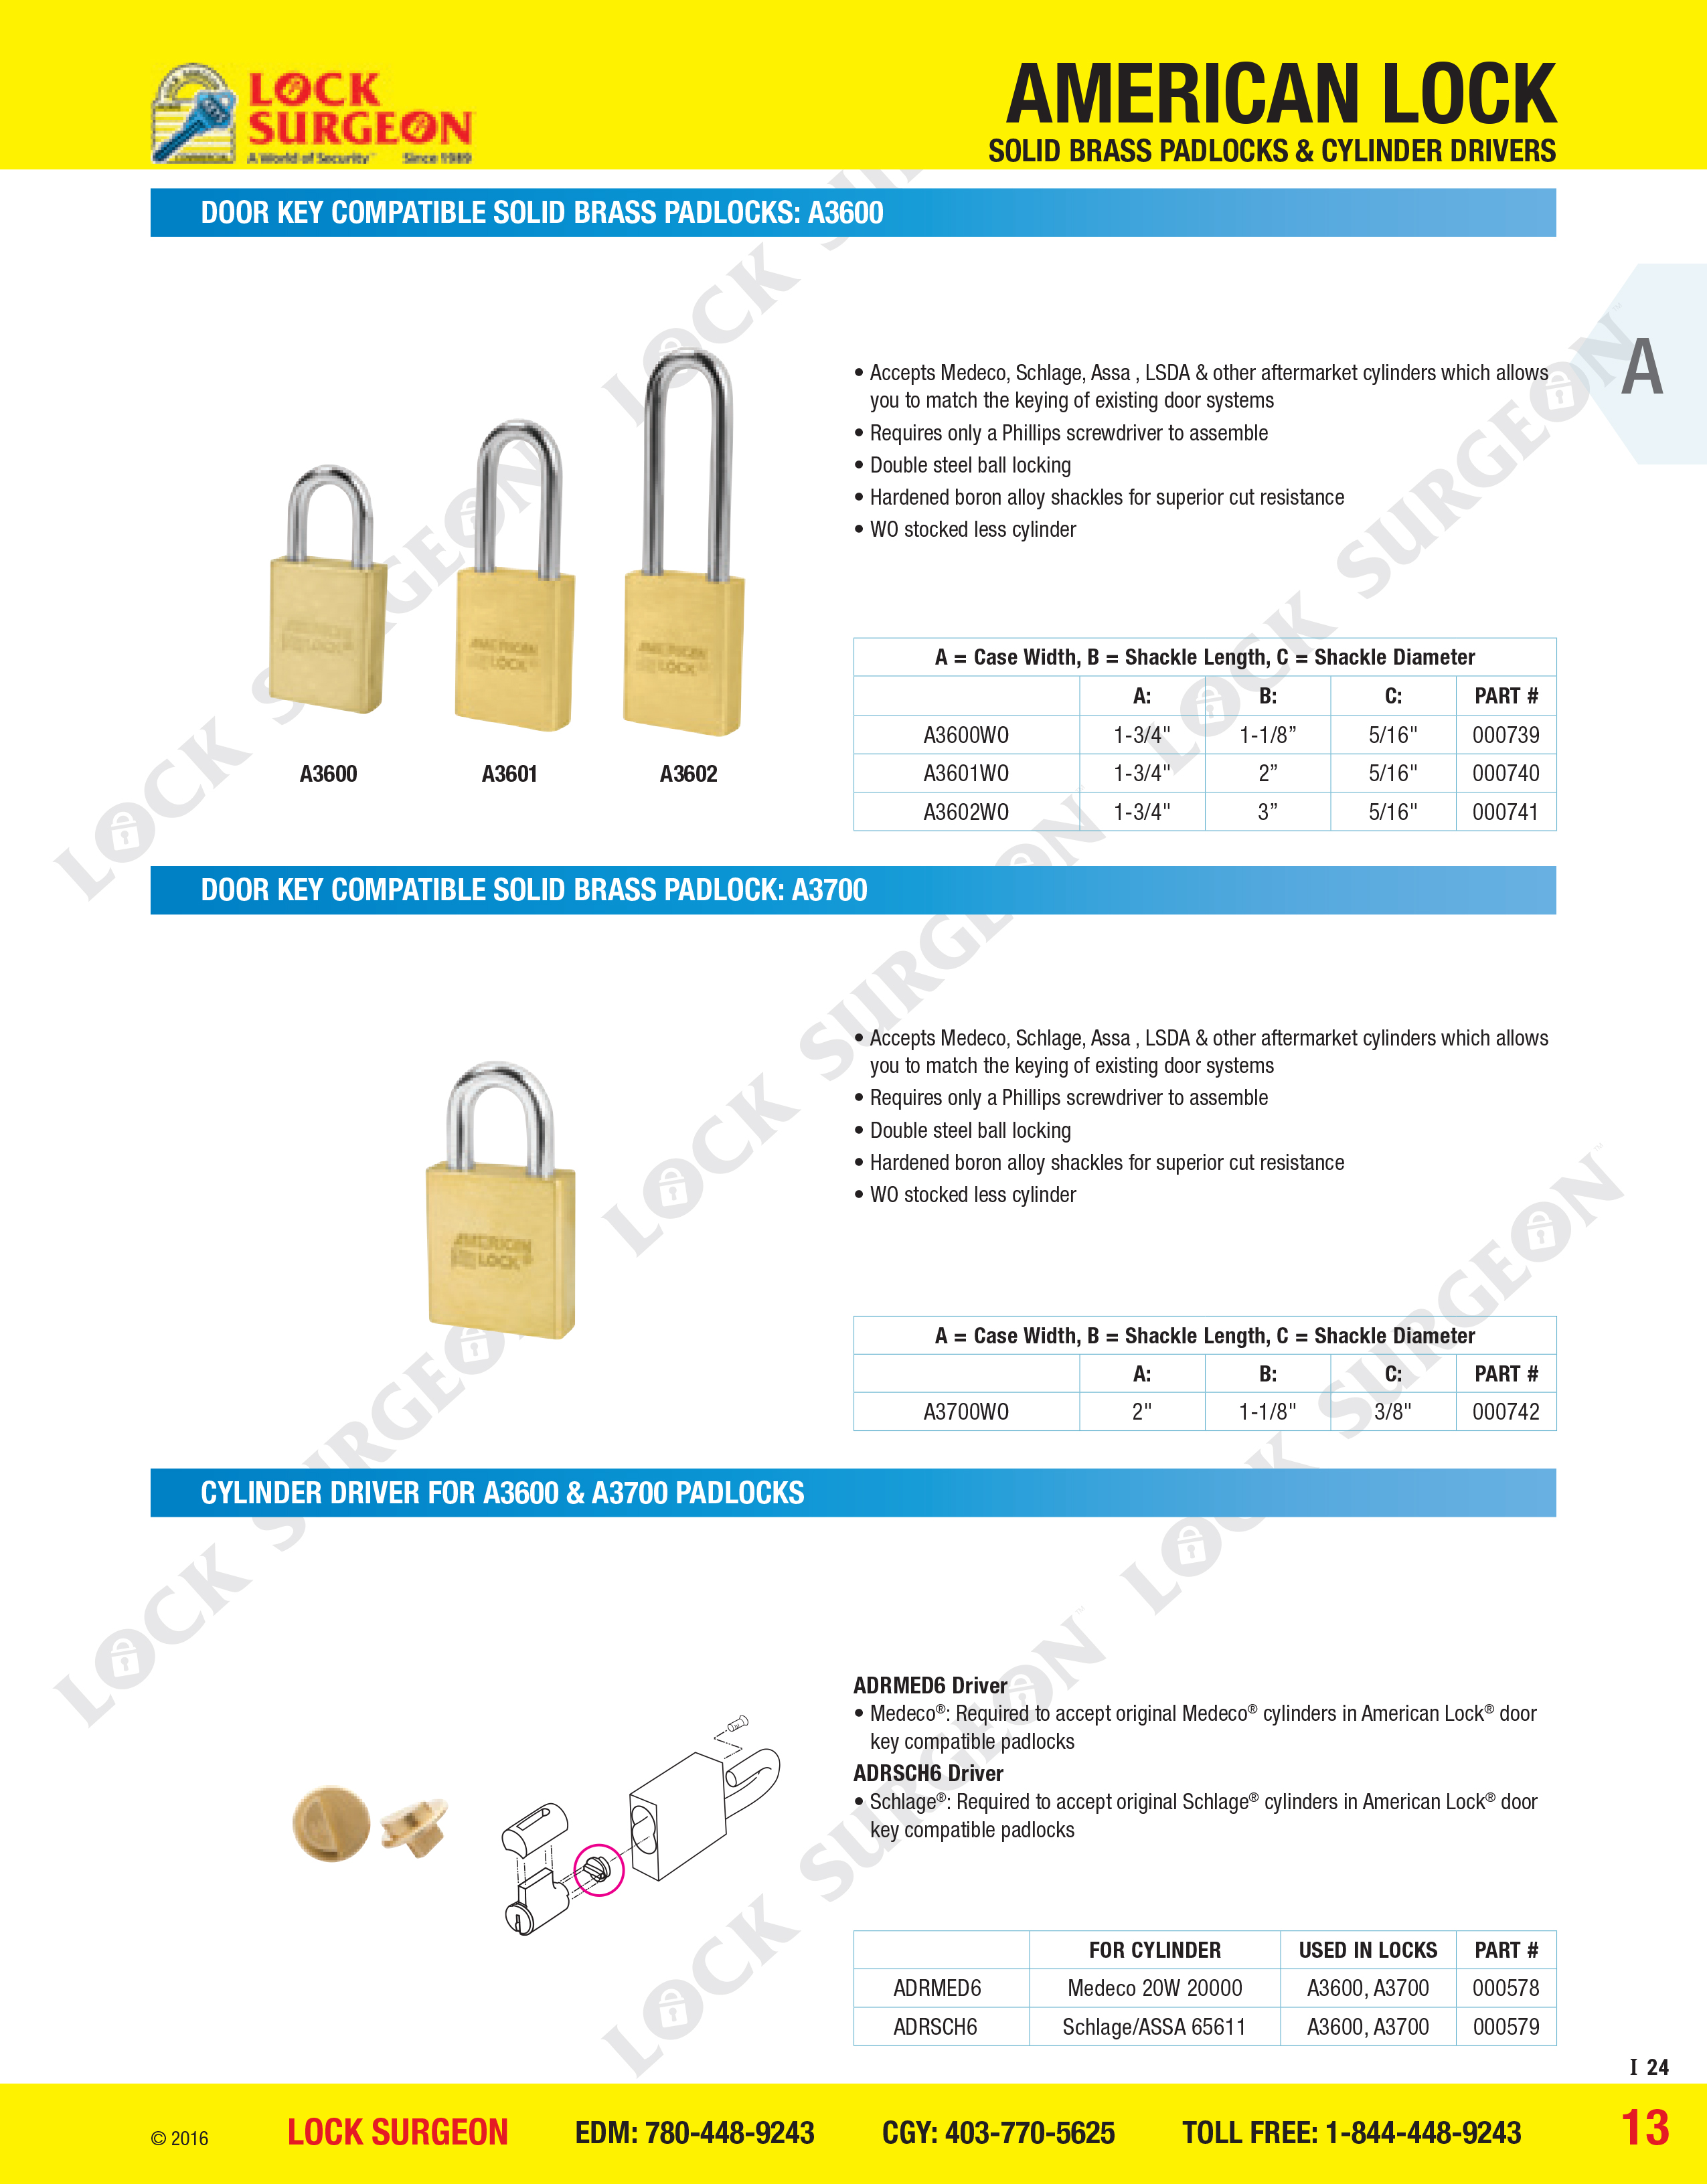 Acheson American Lock Door key compatible solid brass A3600 A3700 Cylinder drivers - A3600 A3700.